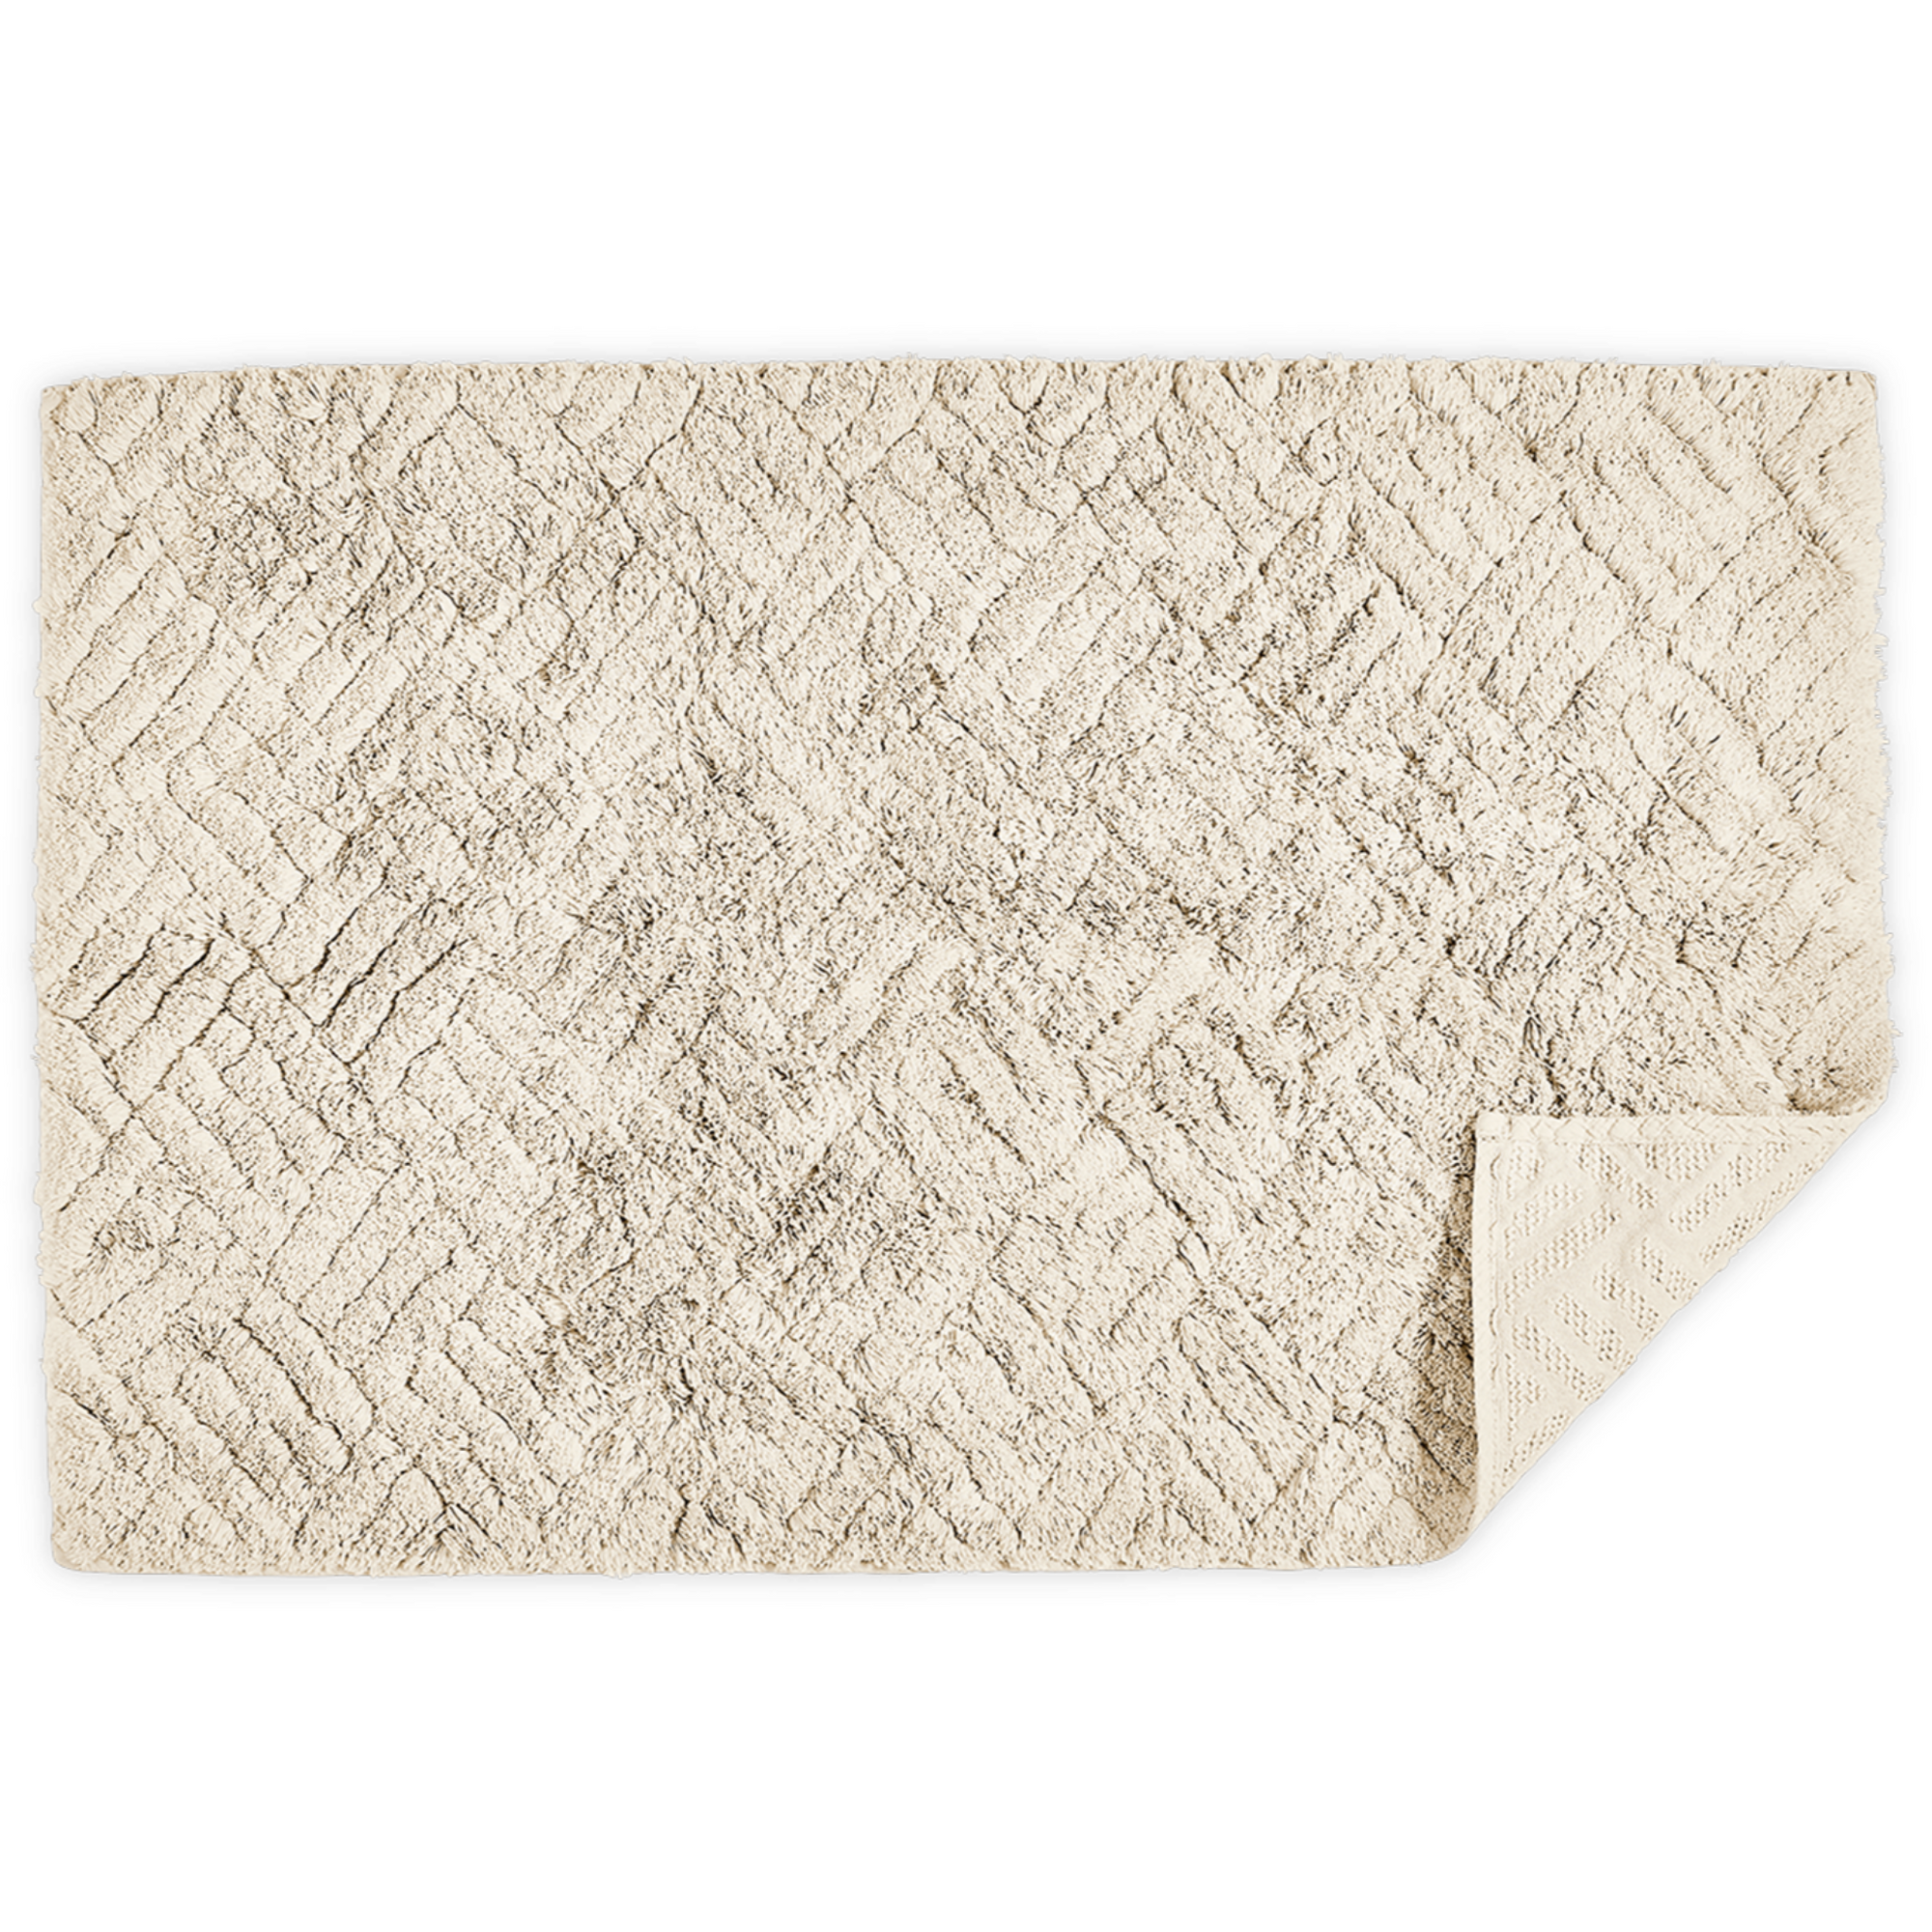 Silo Image of Matouk Cairo Bath Rugs in Ivory Color